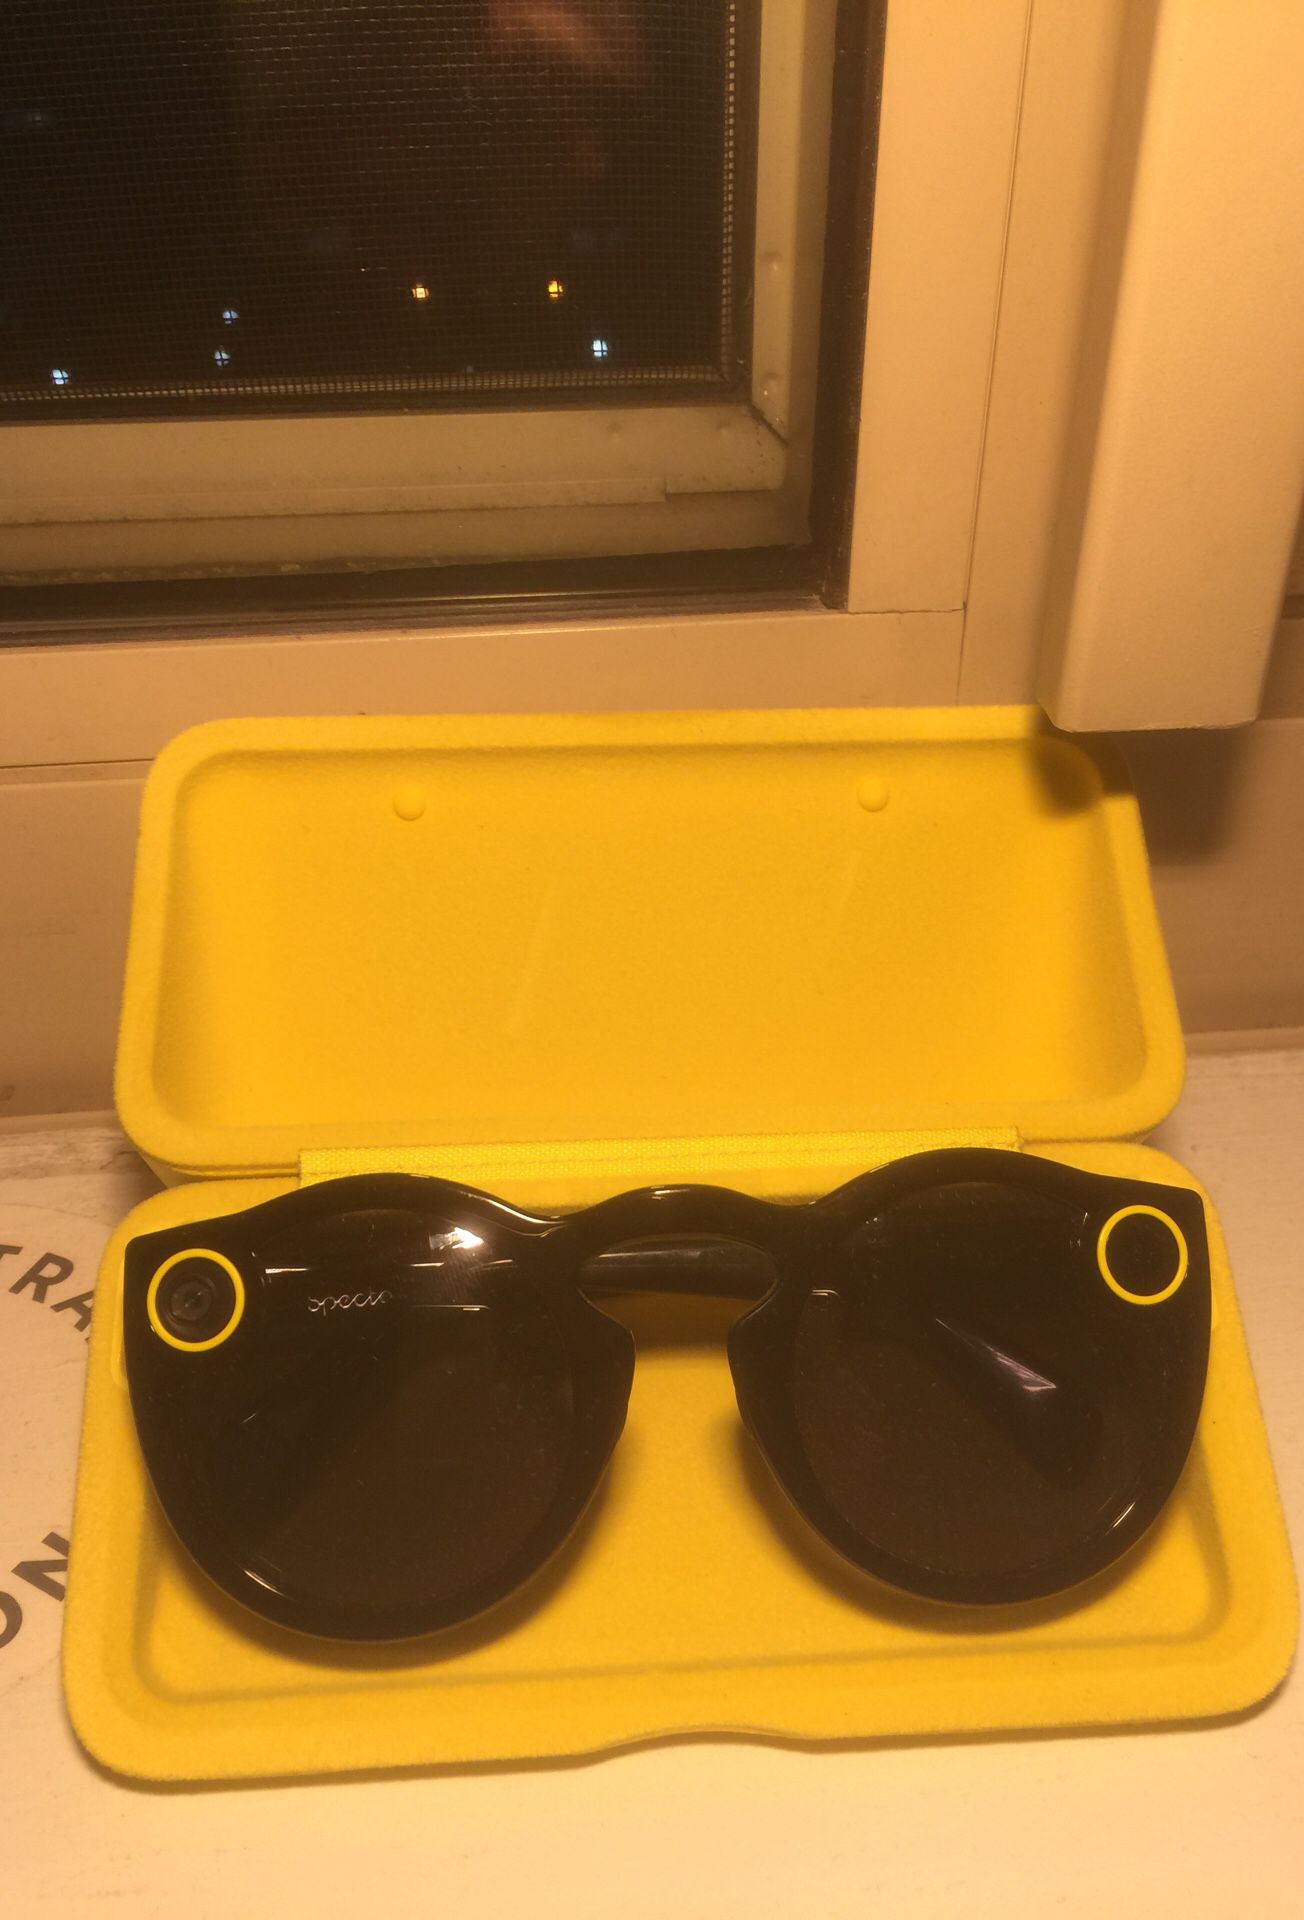 Snapchat Spectacles!